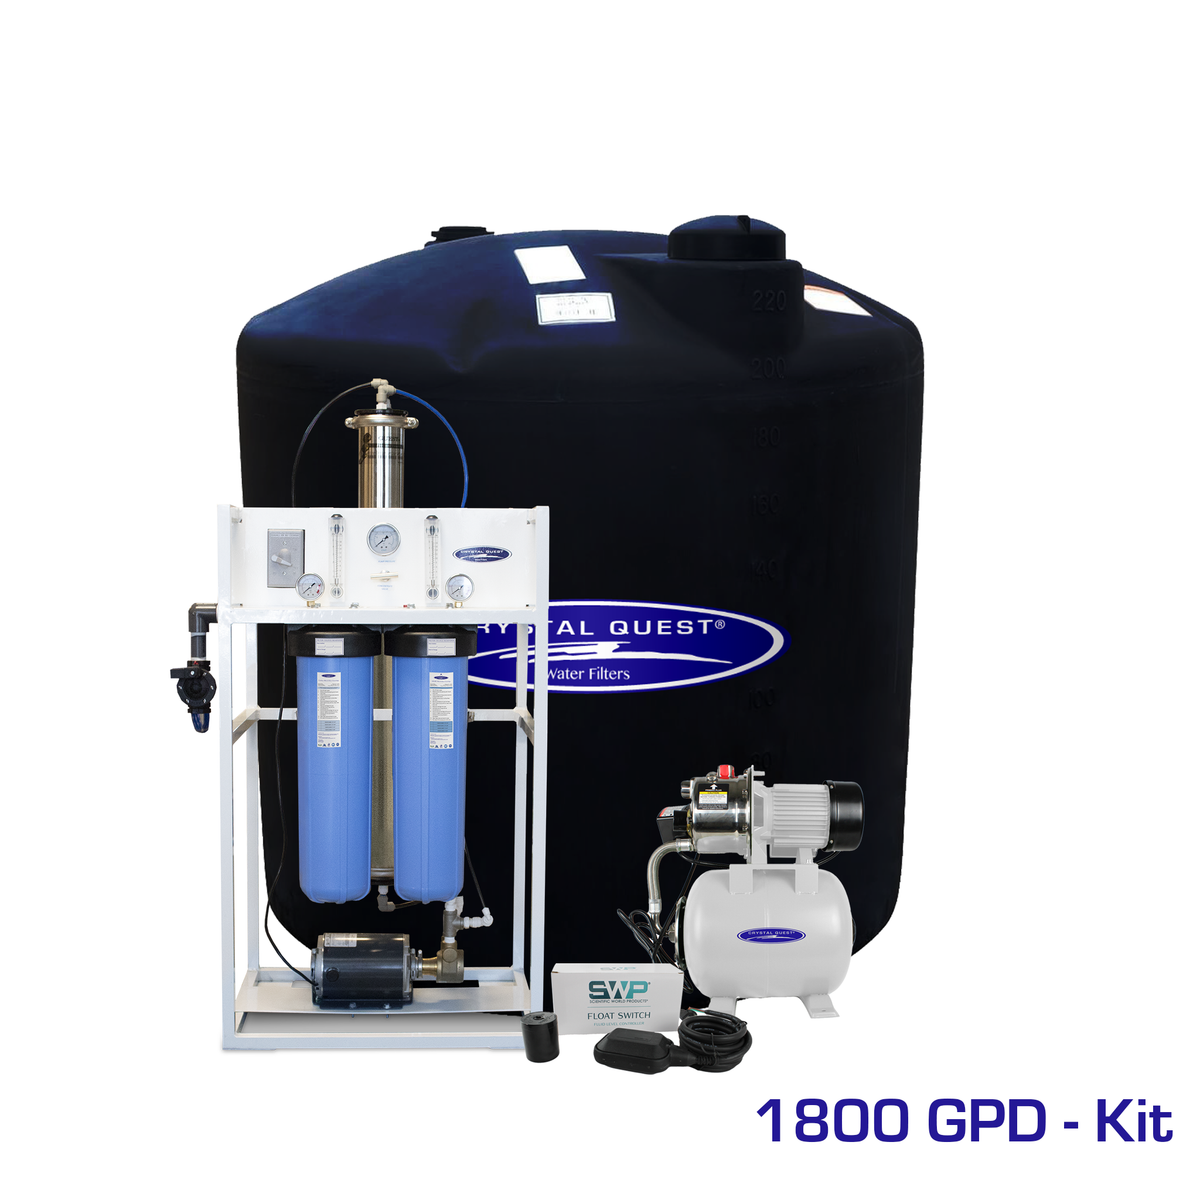 1,800 GPD / Add Storage Tank Kit (220 Gal) Commercial Mid-Flow Reverse Osmosis System (500-7000 GPD) - Commercial - Crystal Quest